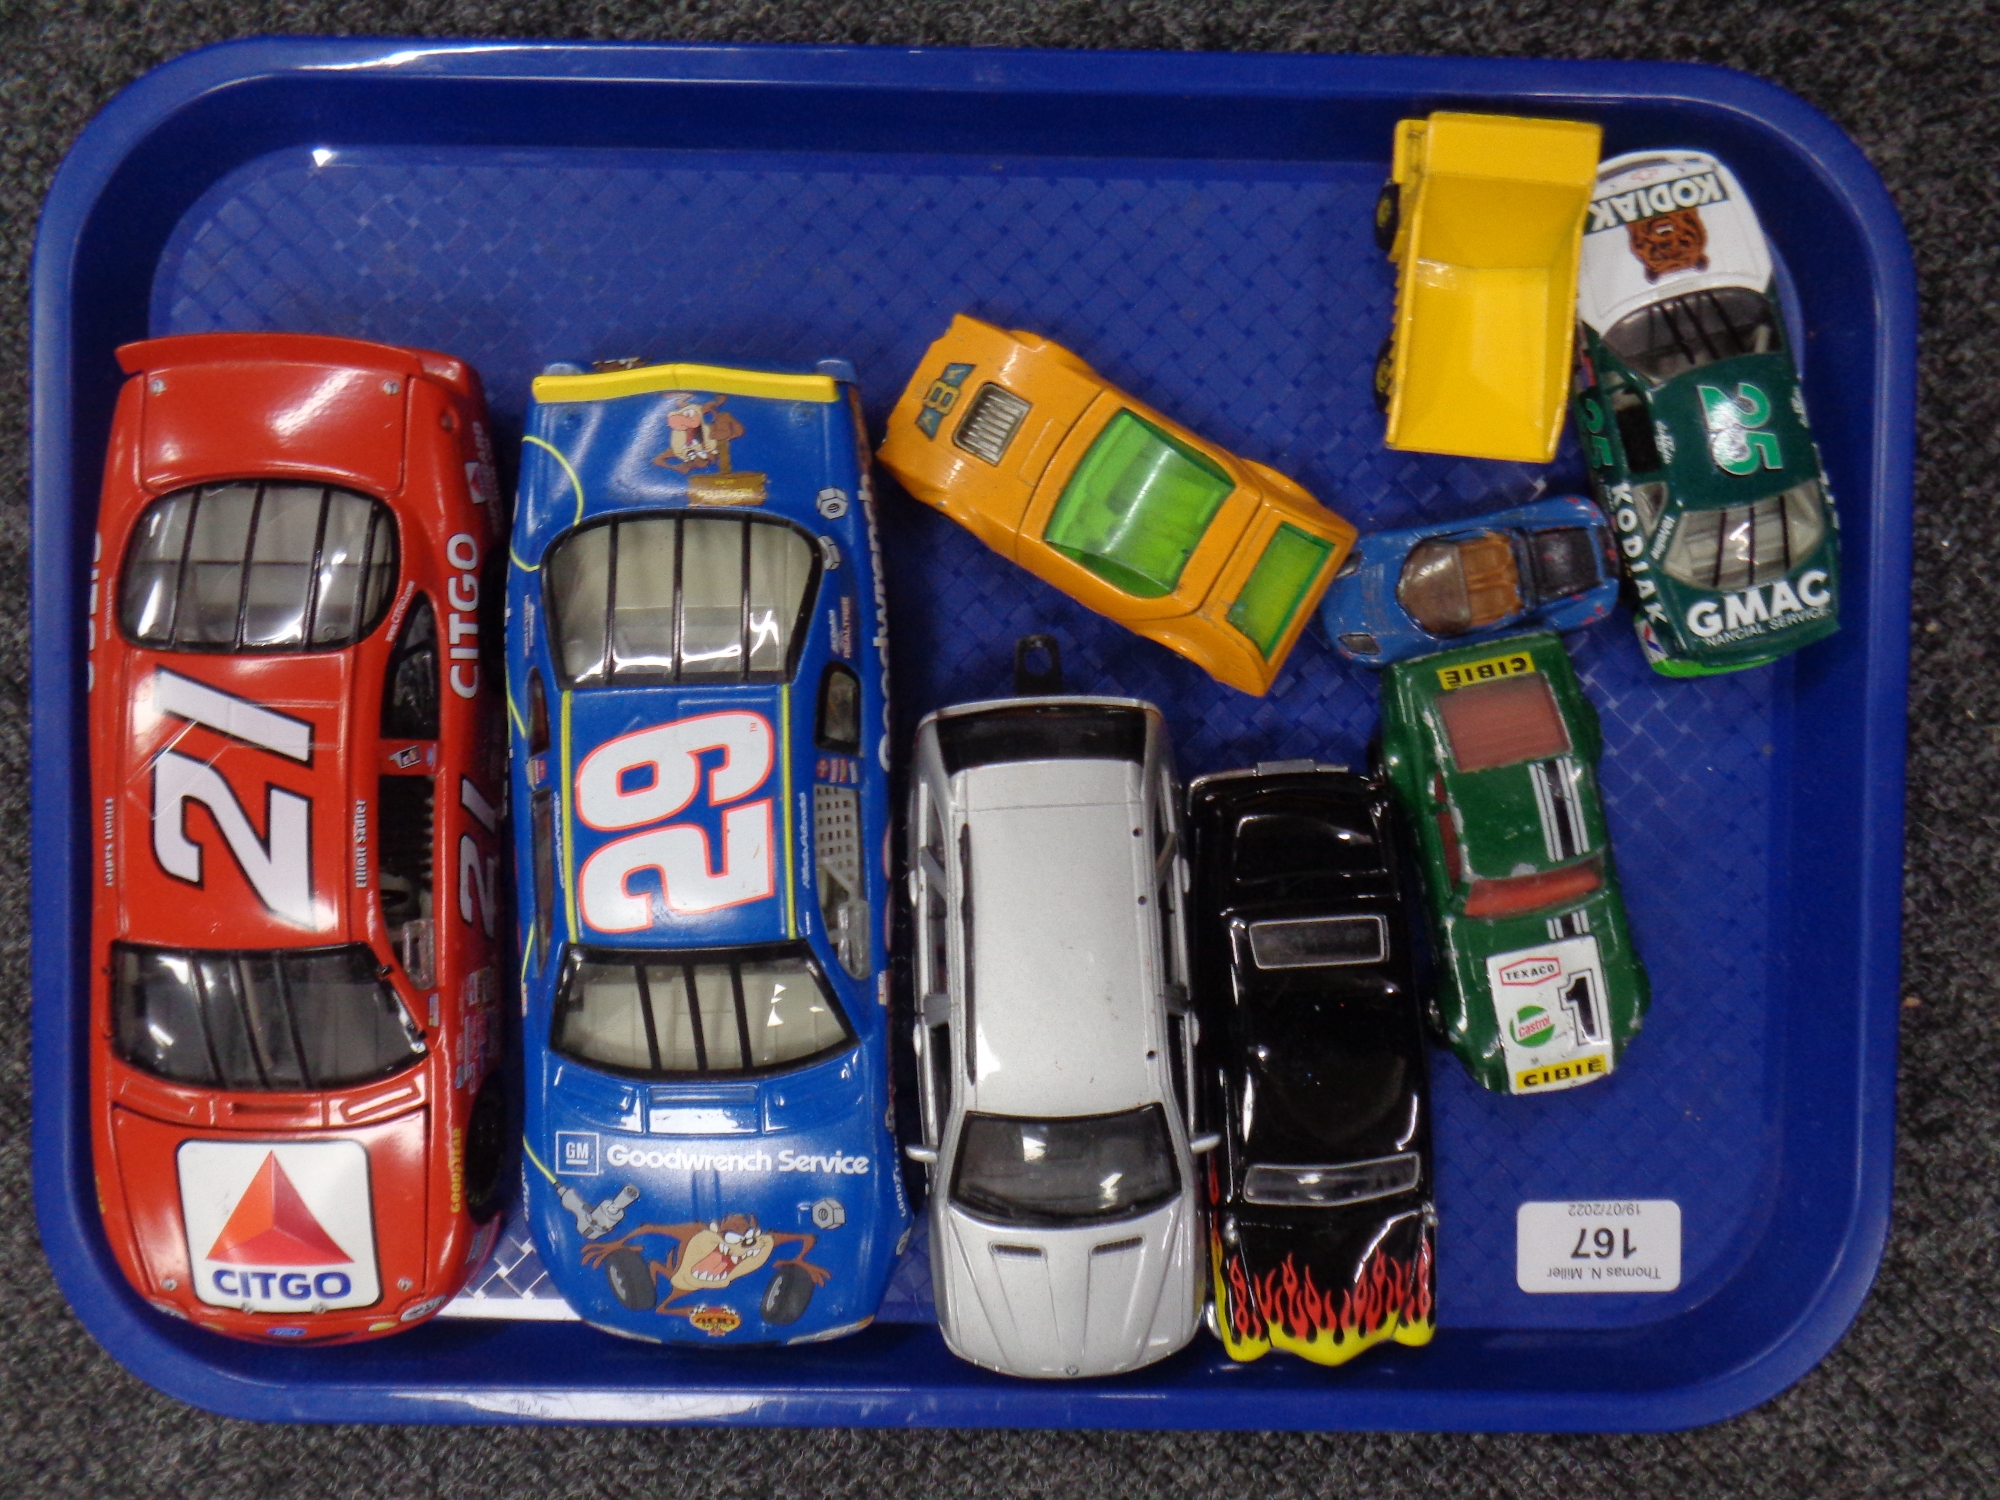 Looney Tunes Nascar , Michael Waltrip #21 Citgo Winston Nascar, and other 20th century model cars.